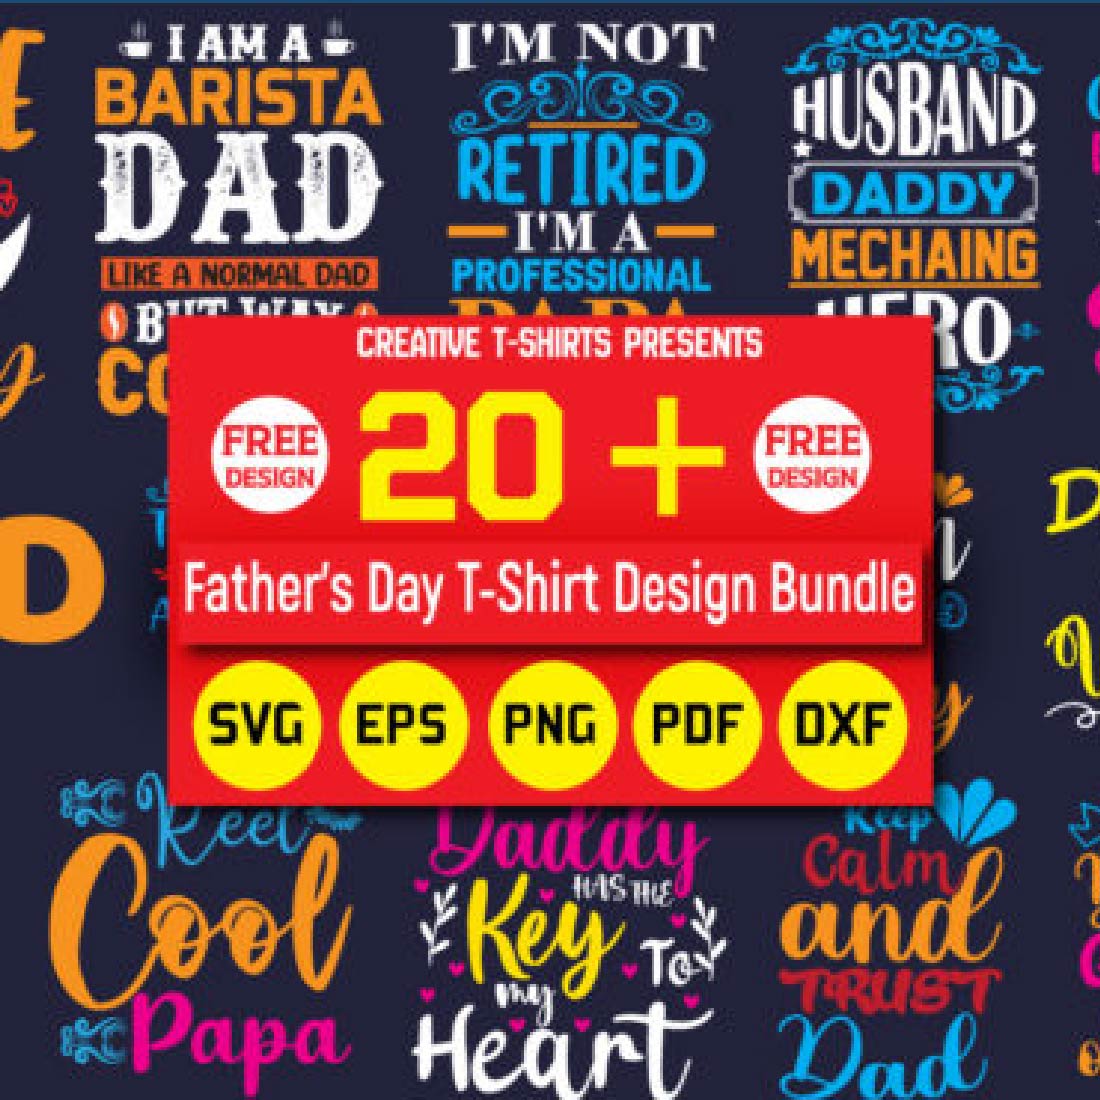 Father’s Day Free T-Shirt Design Bundle cover image.